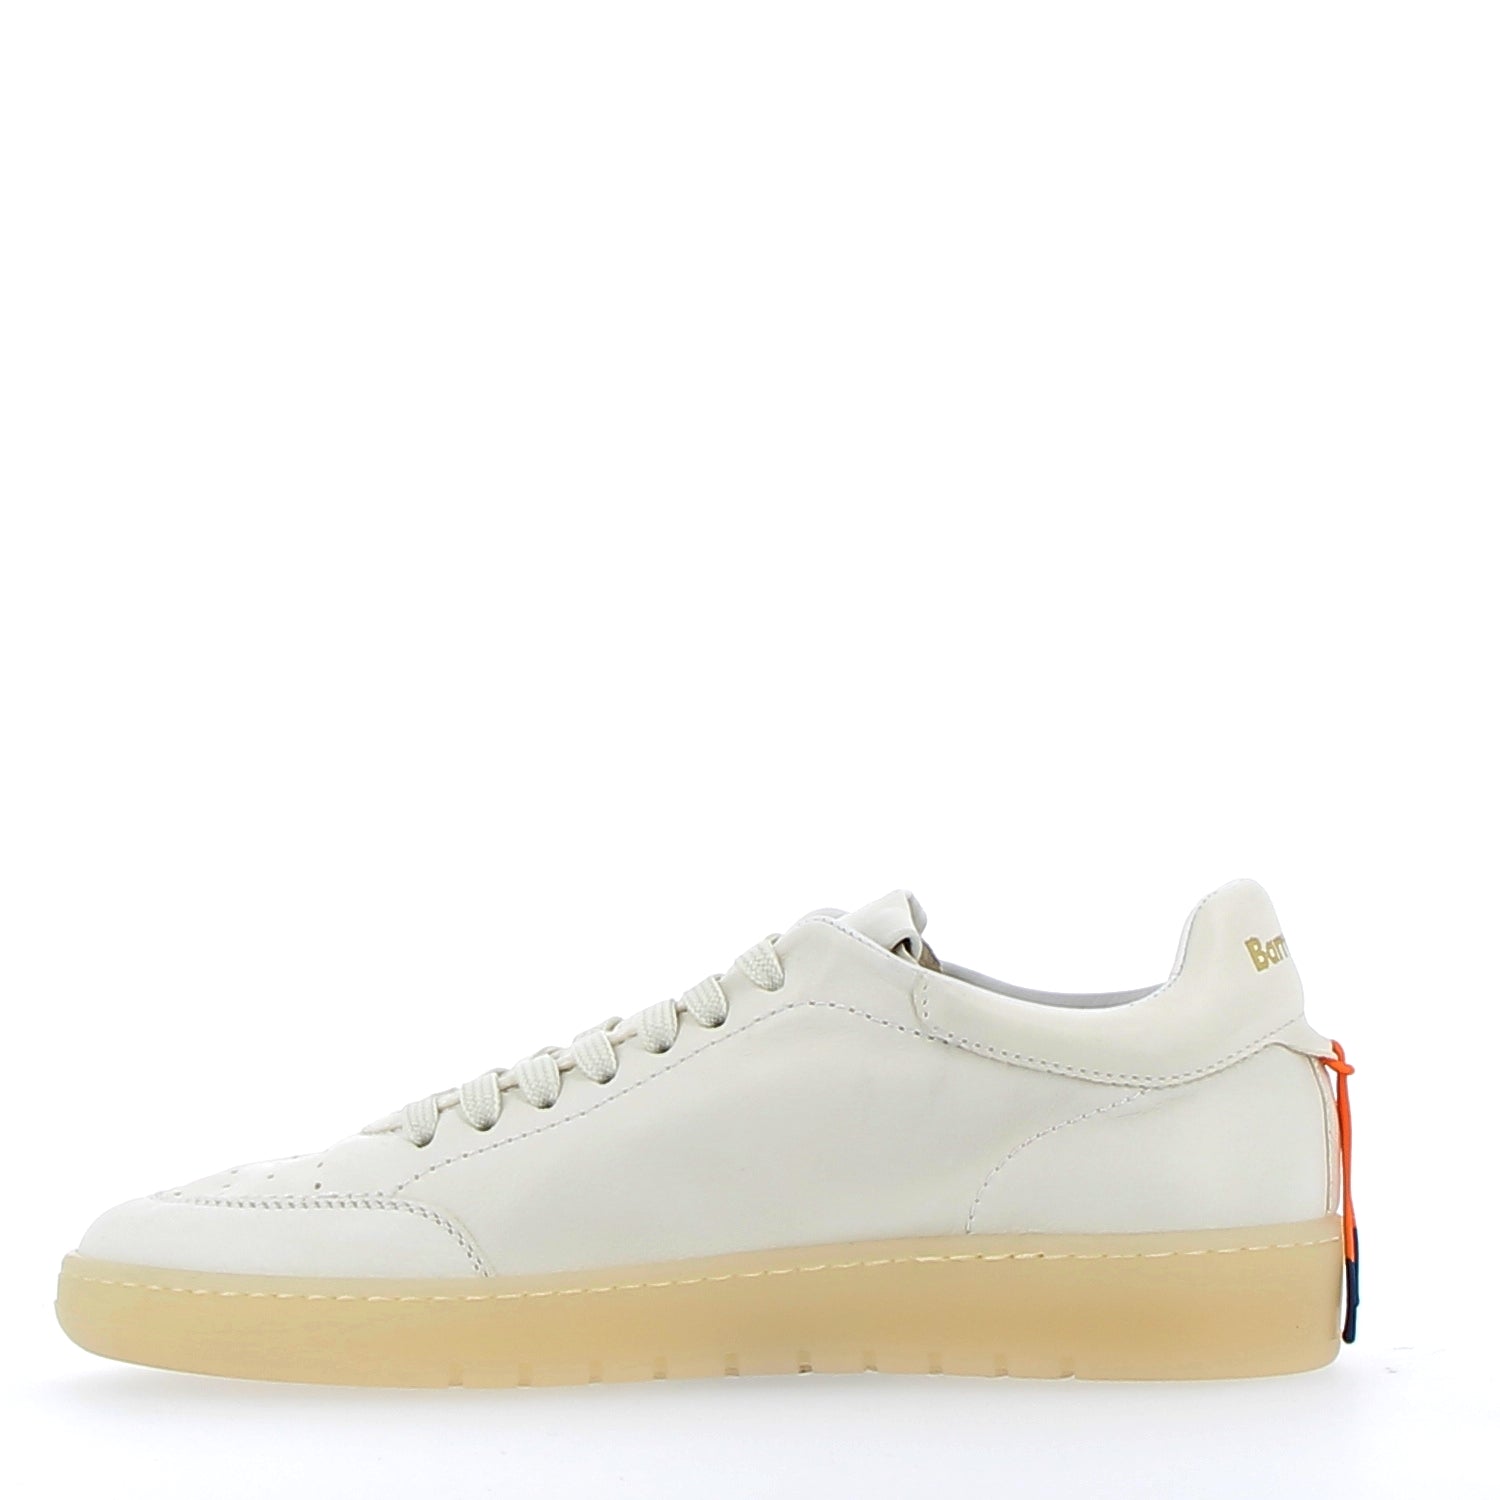 White sneaker in supersoft leather